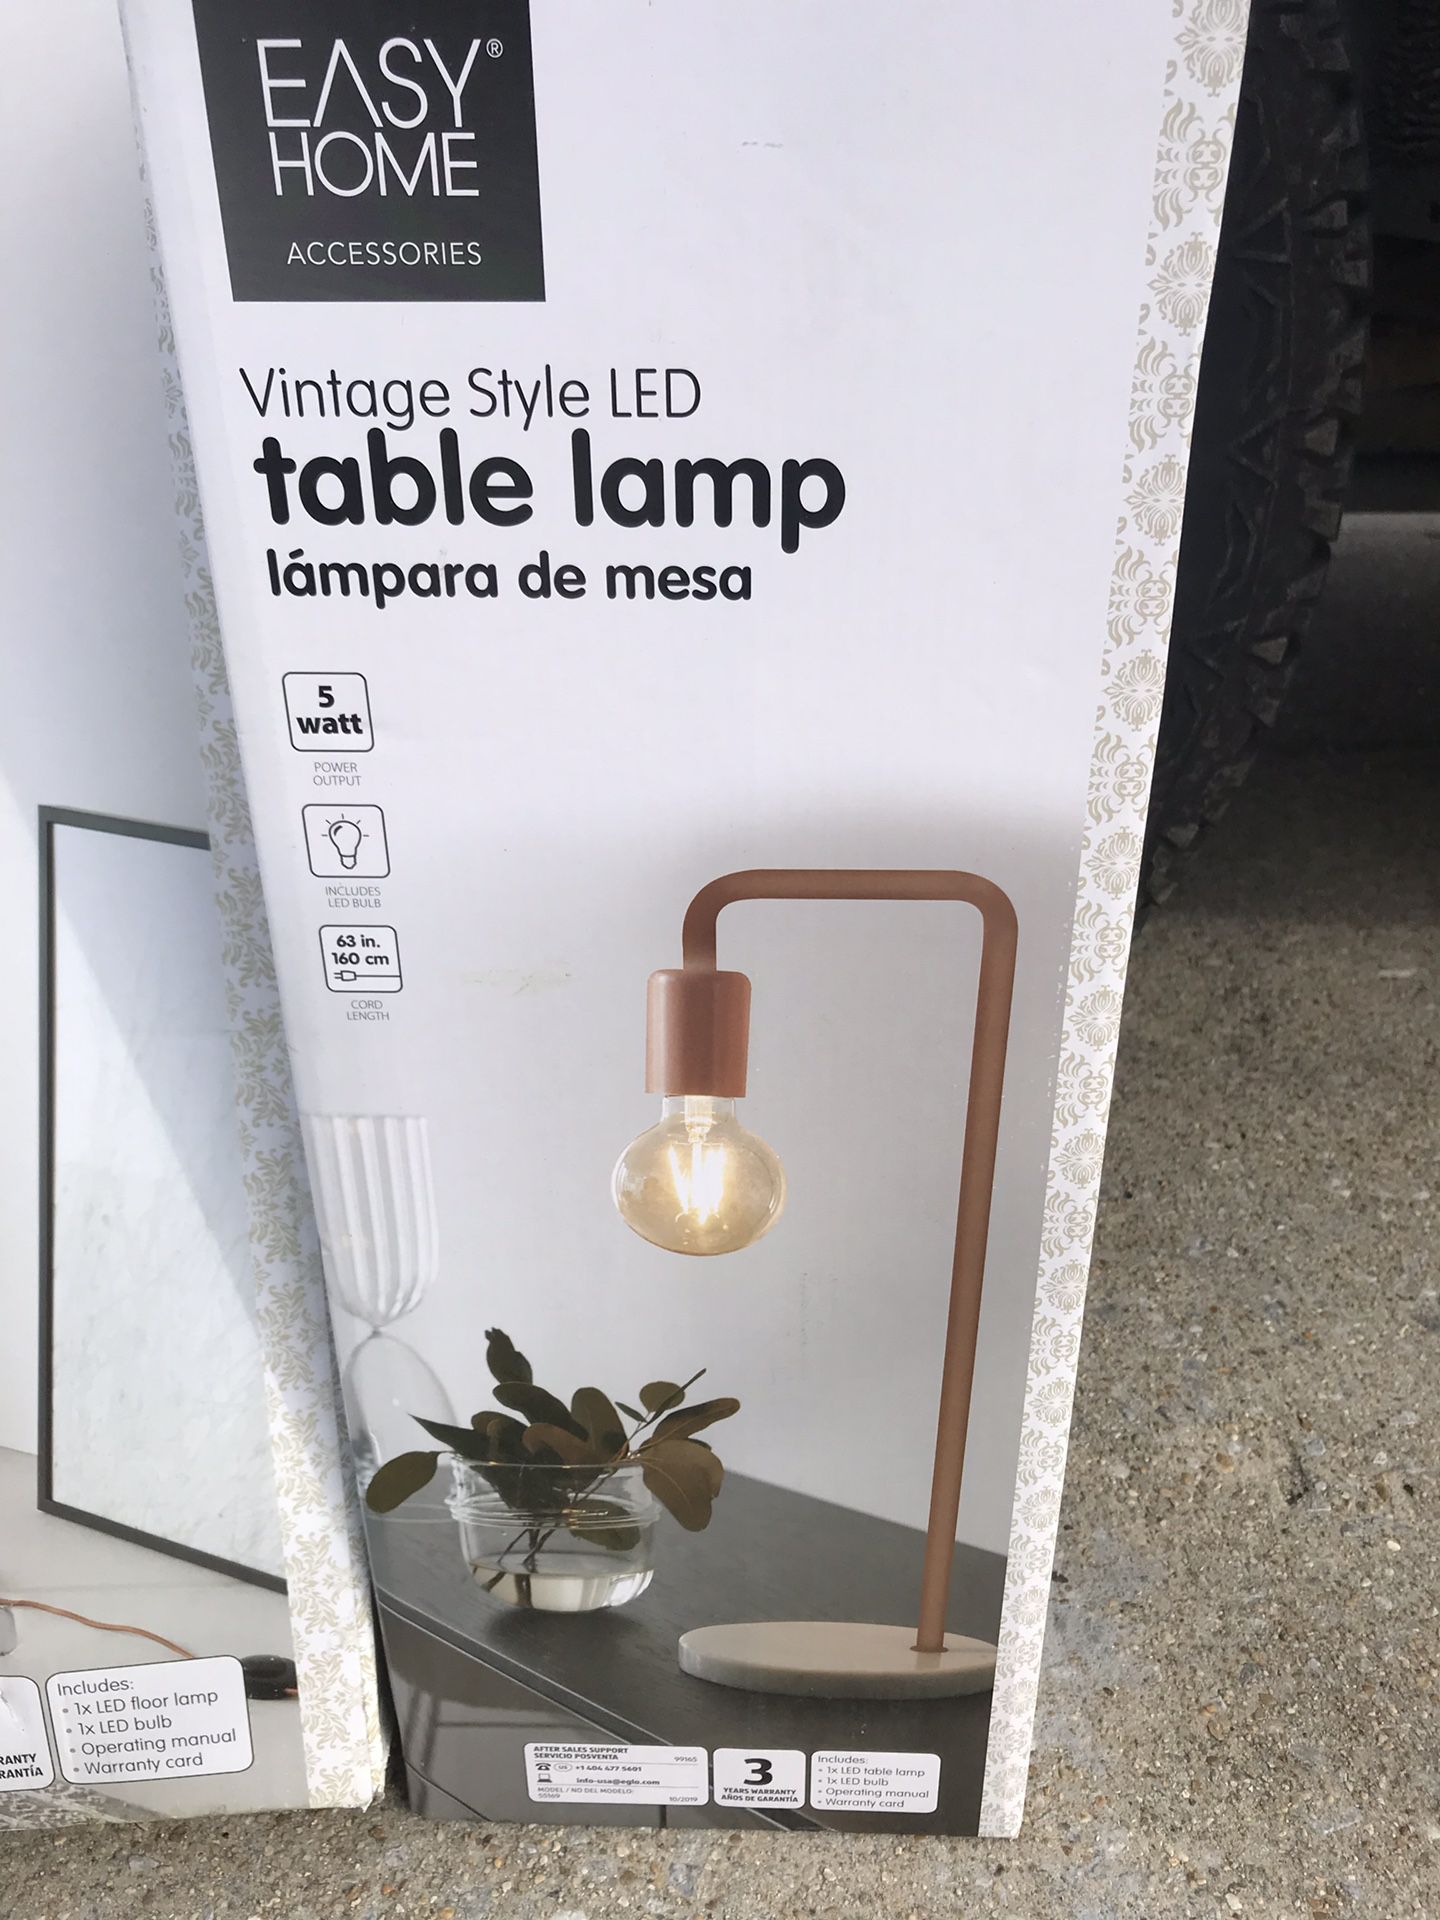 Brand new table lamp Only $10